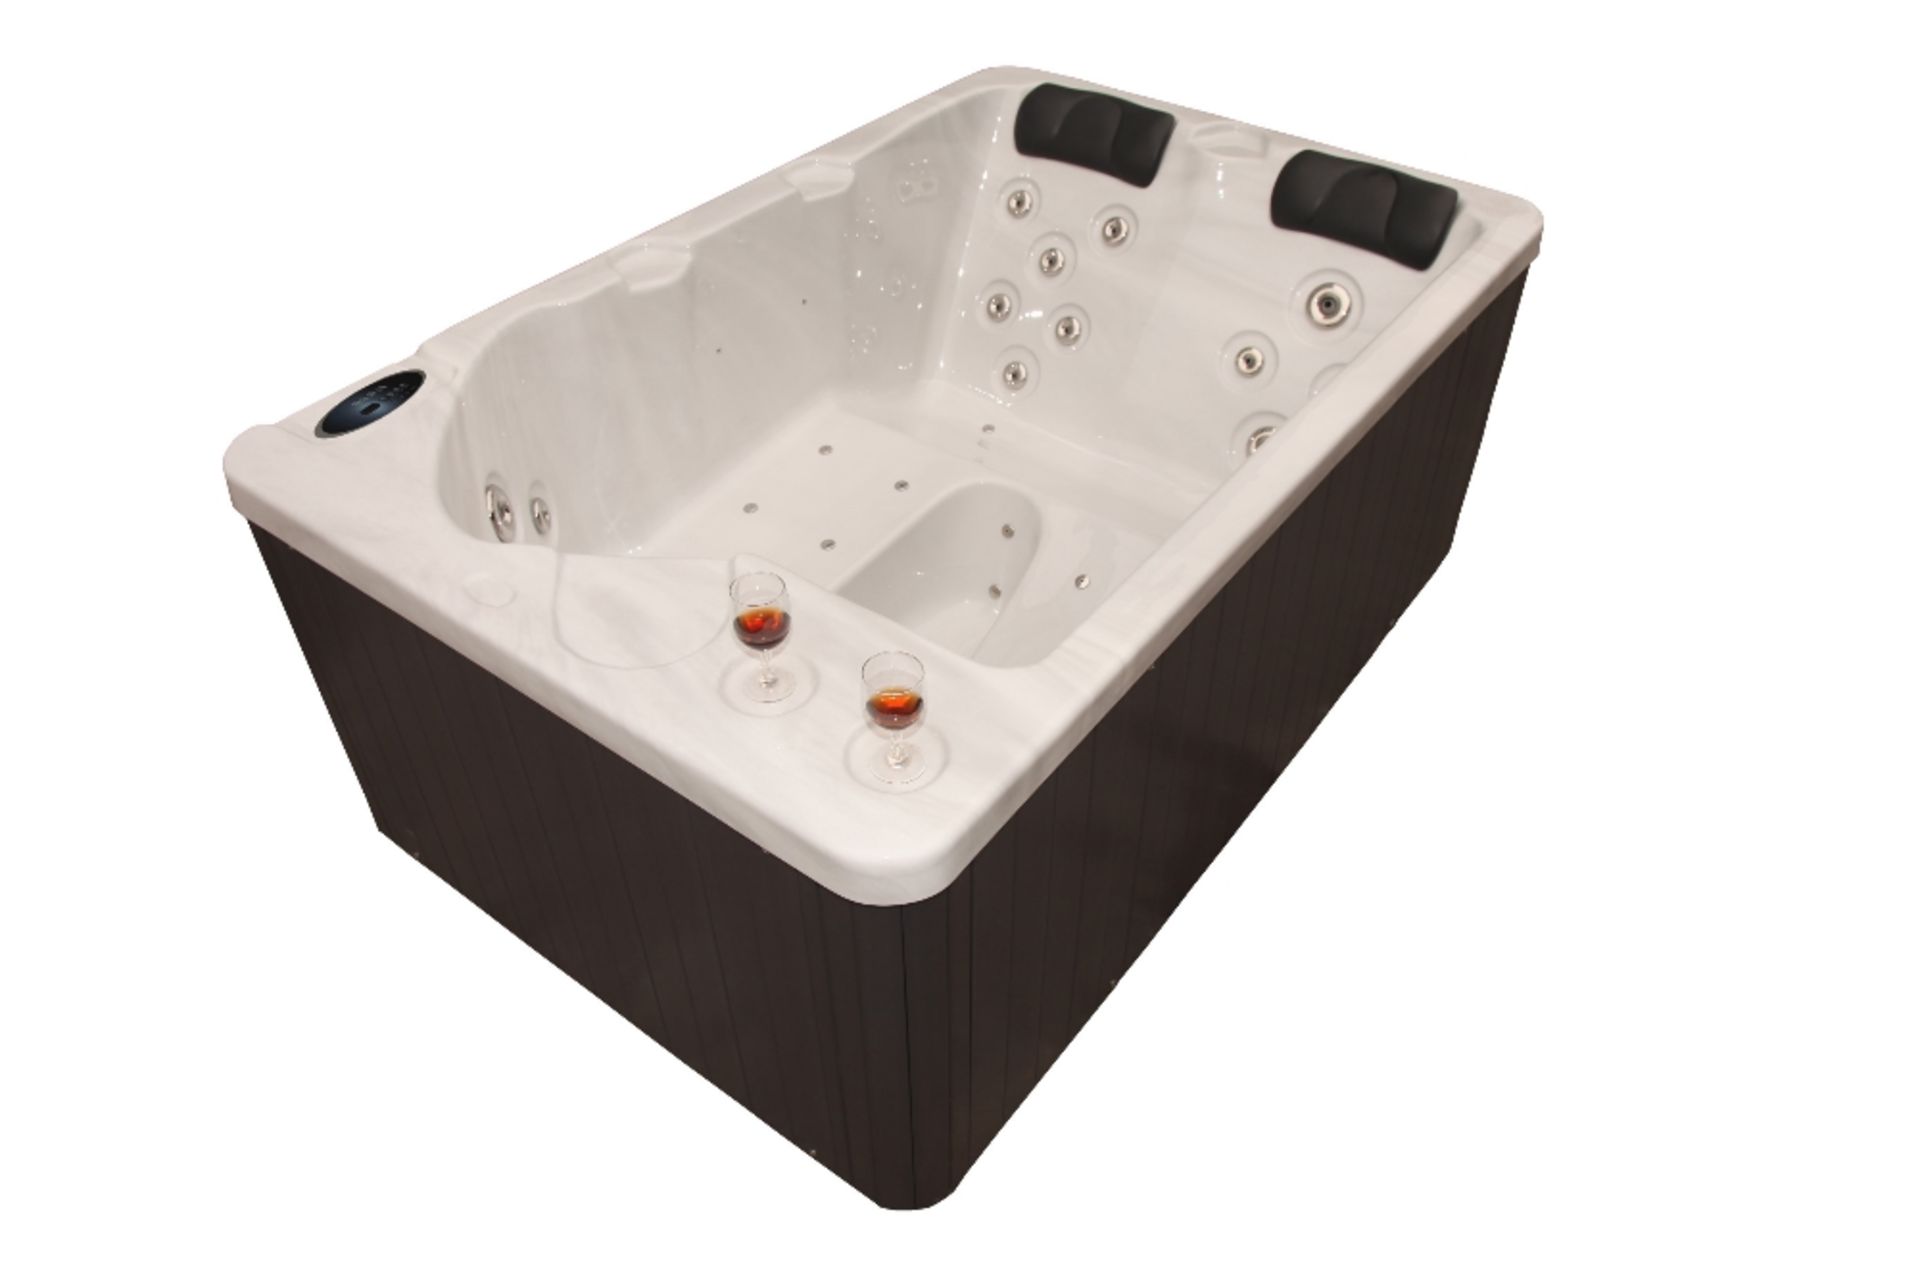 NEW PACKAGED 2016 HOT TUB, MATCHING STEPS, SIDE, INSULATING COVER, TOP USA RUNNING GEAR, USA Balboa